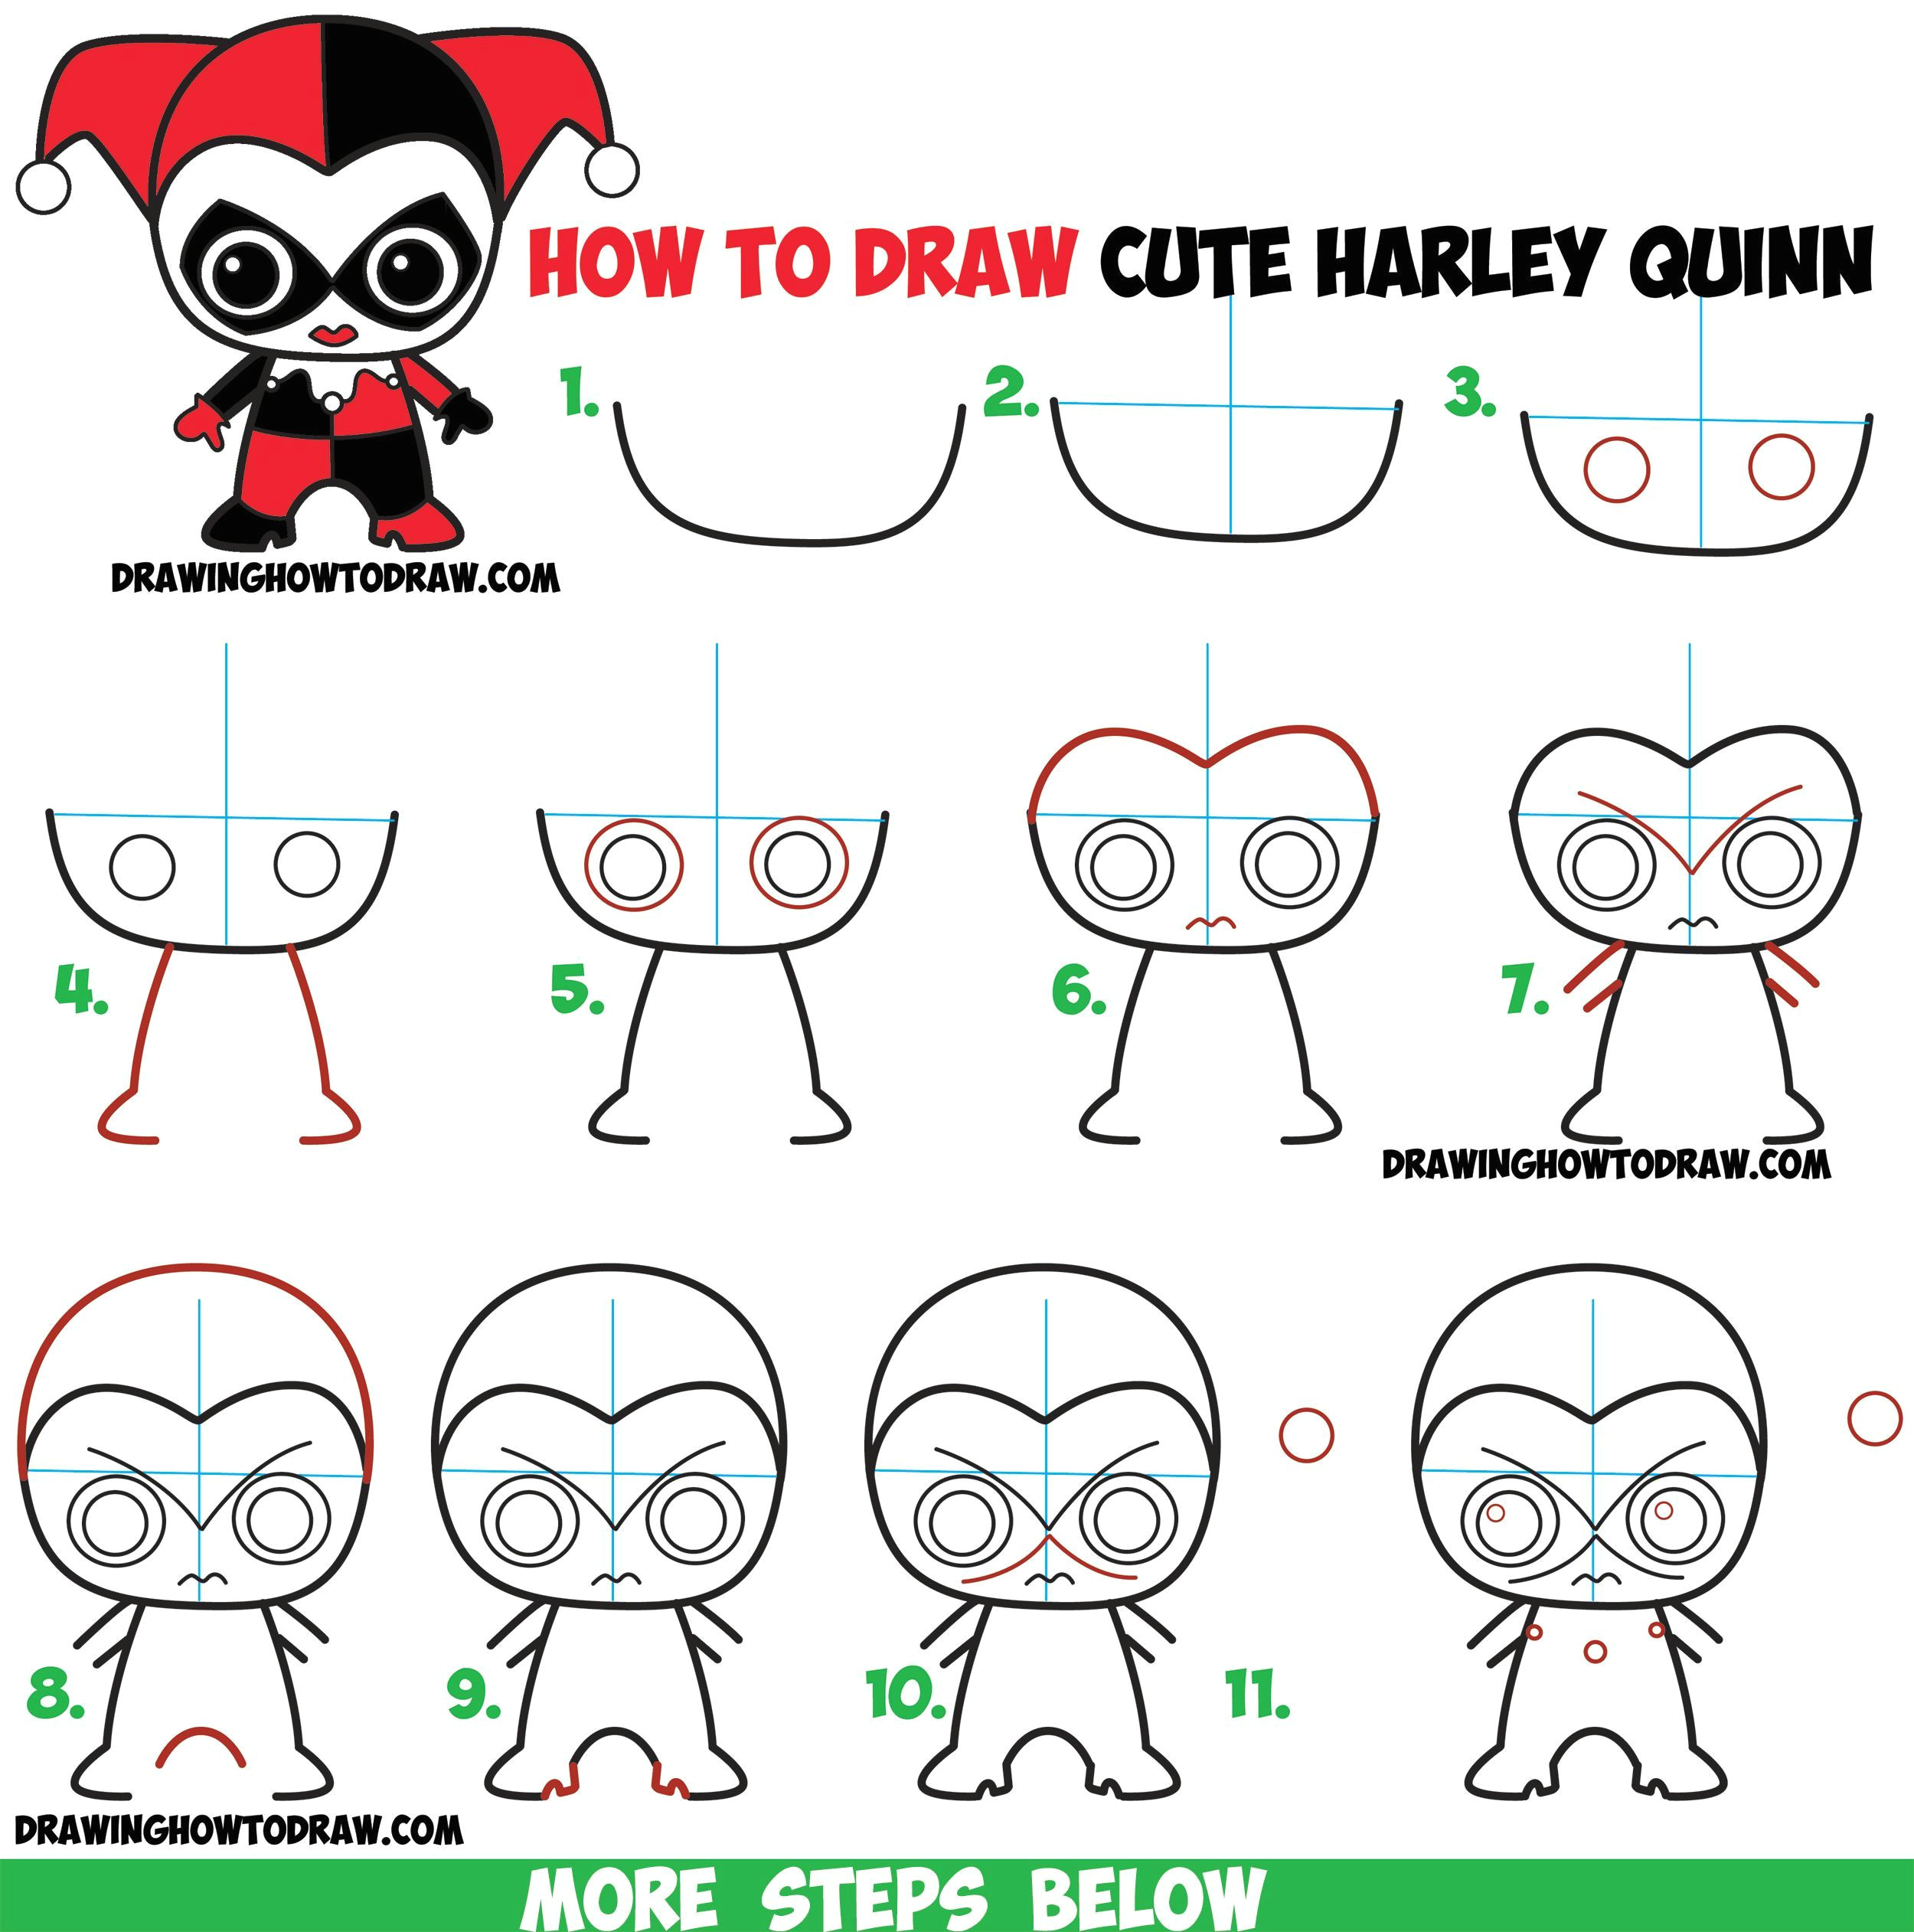 how to draw cute chibi harley quinn from dc comics in easy step by step drawing